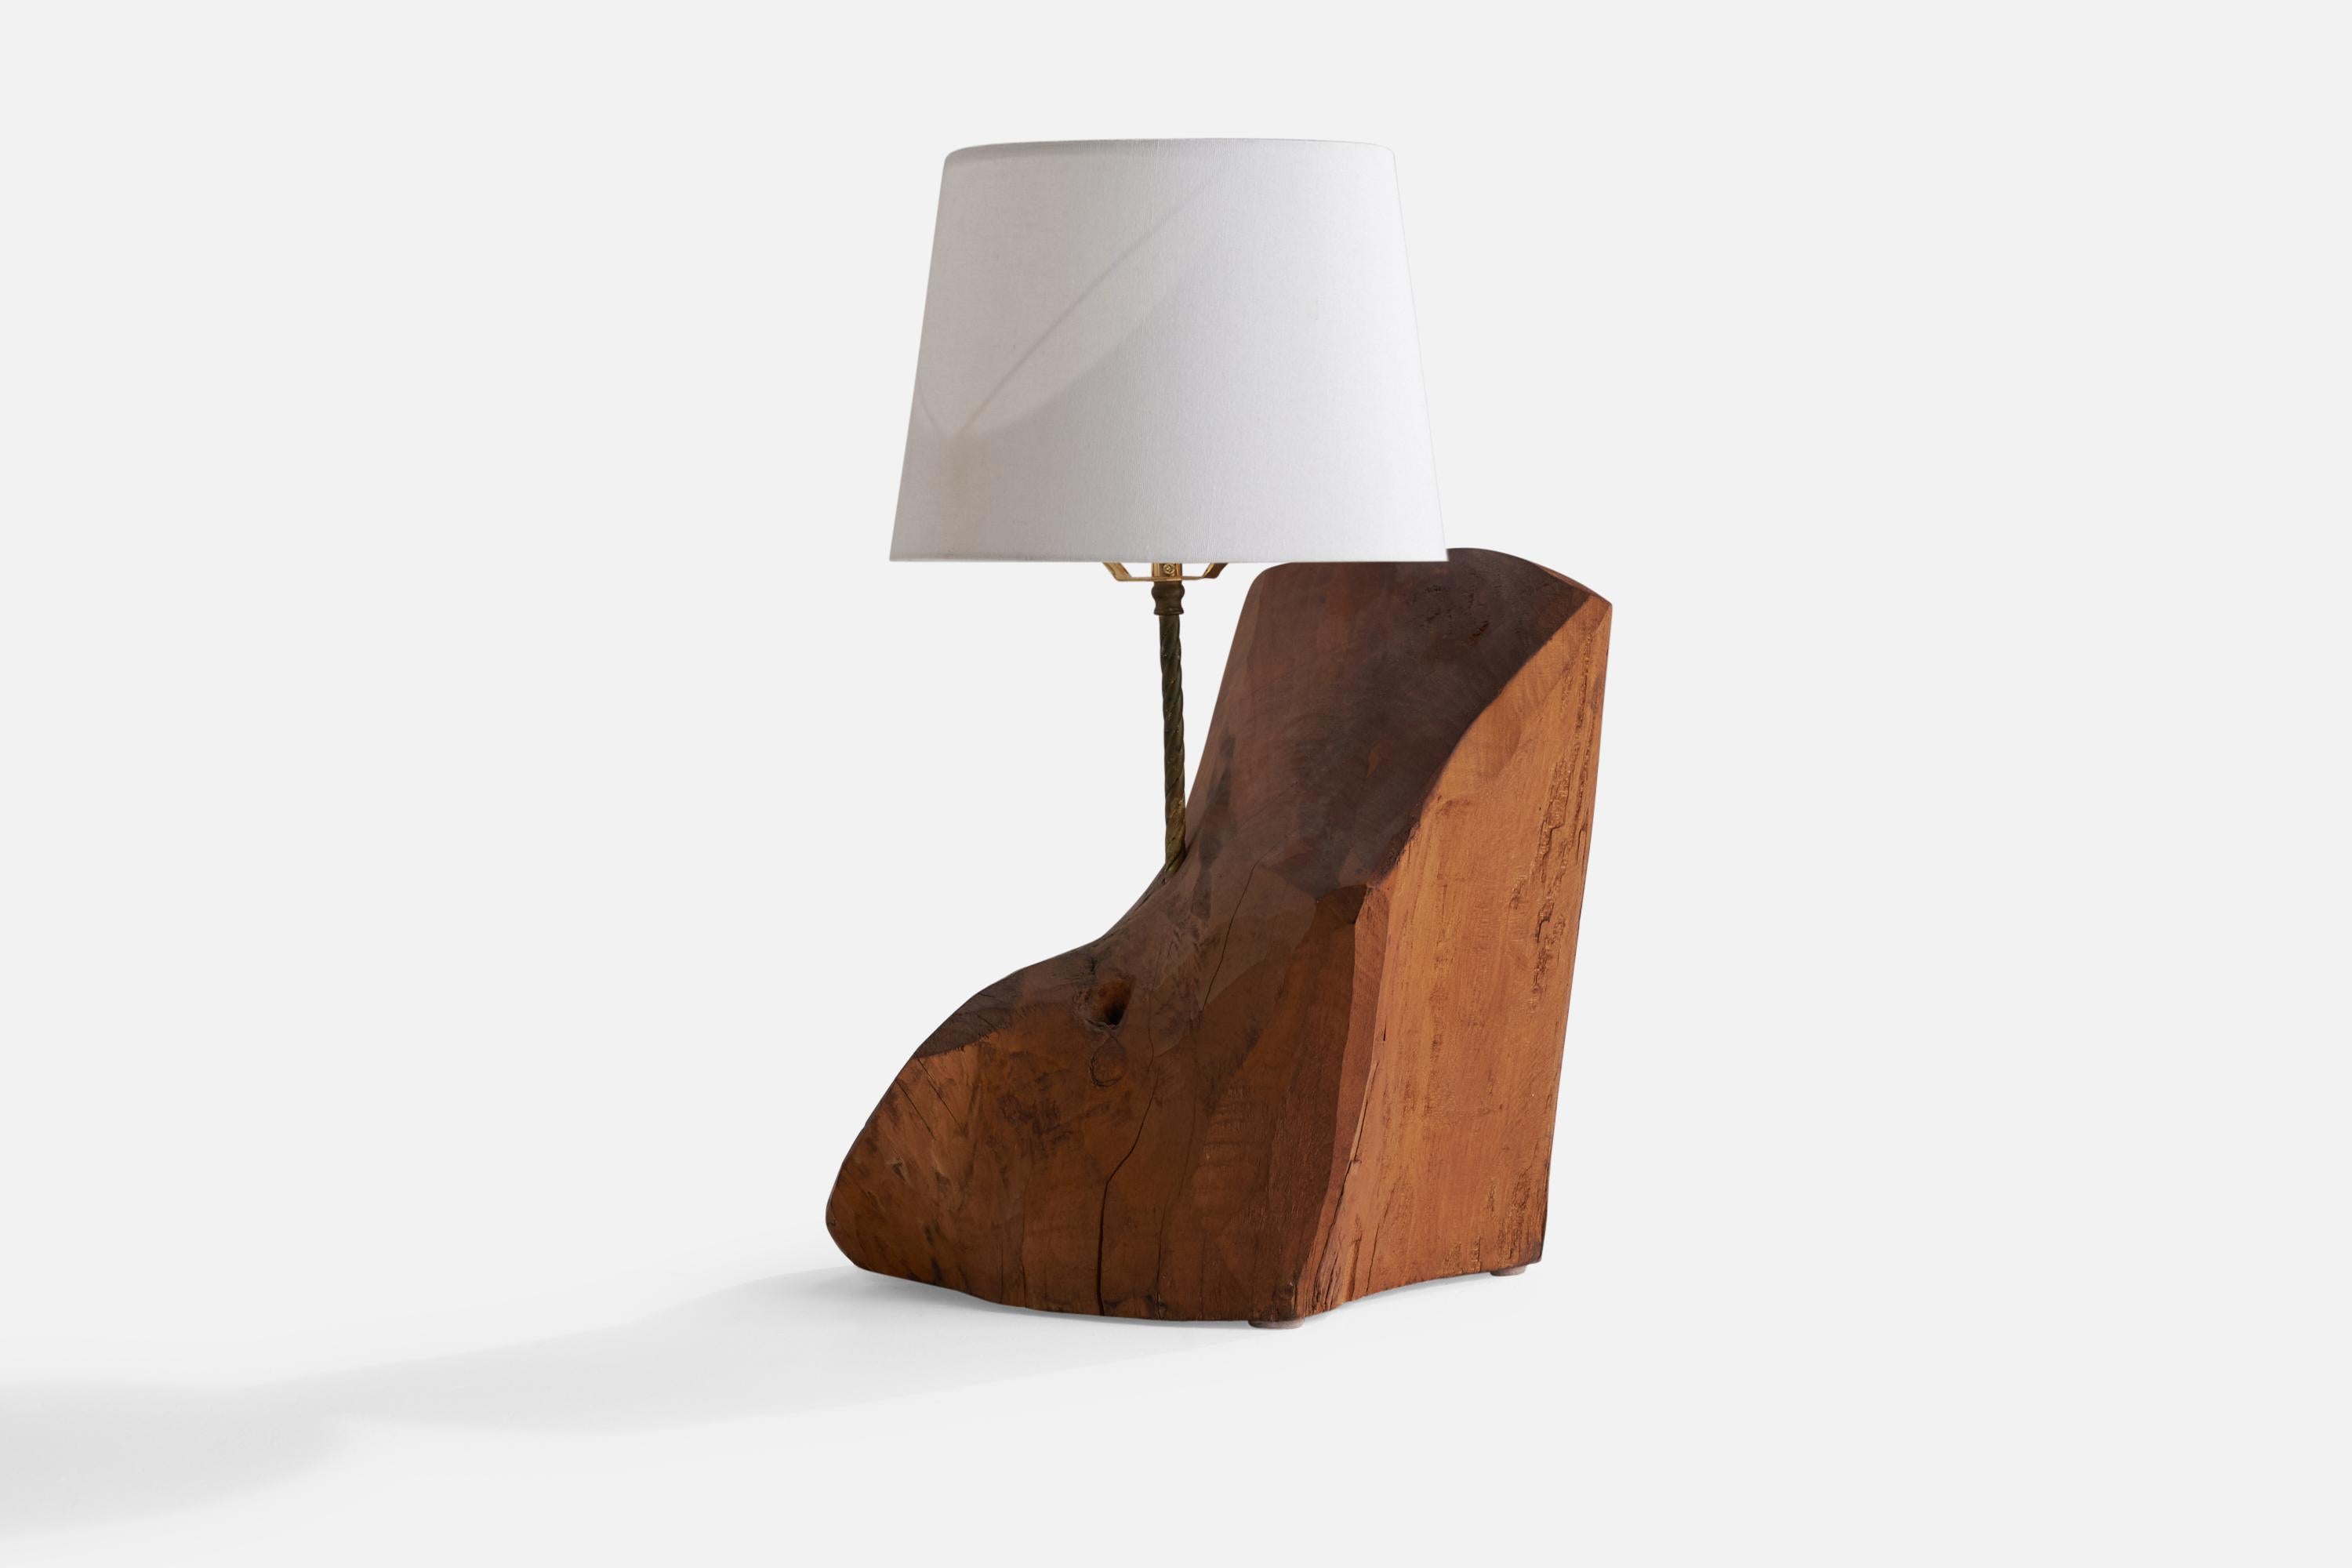 A large freeform wood, brass and white fabric table lamp designed and produced in the US, 1950s.

Overall Dimensions (inches): 20.75”  H x 10.5” W x 9.75” D
Stated dimensions include shade.
Bulb Specifications: E-26 Bulb
Number of Sockets: 1
All